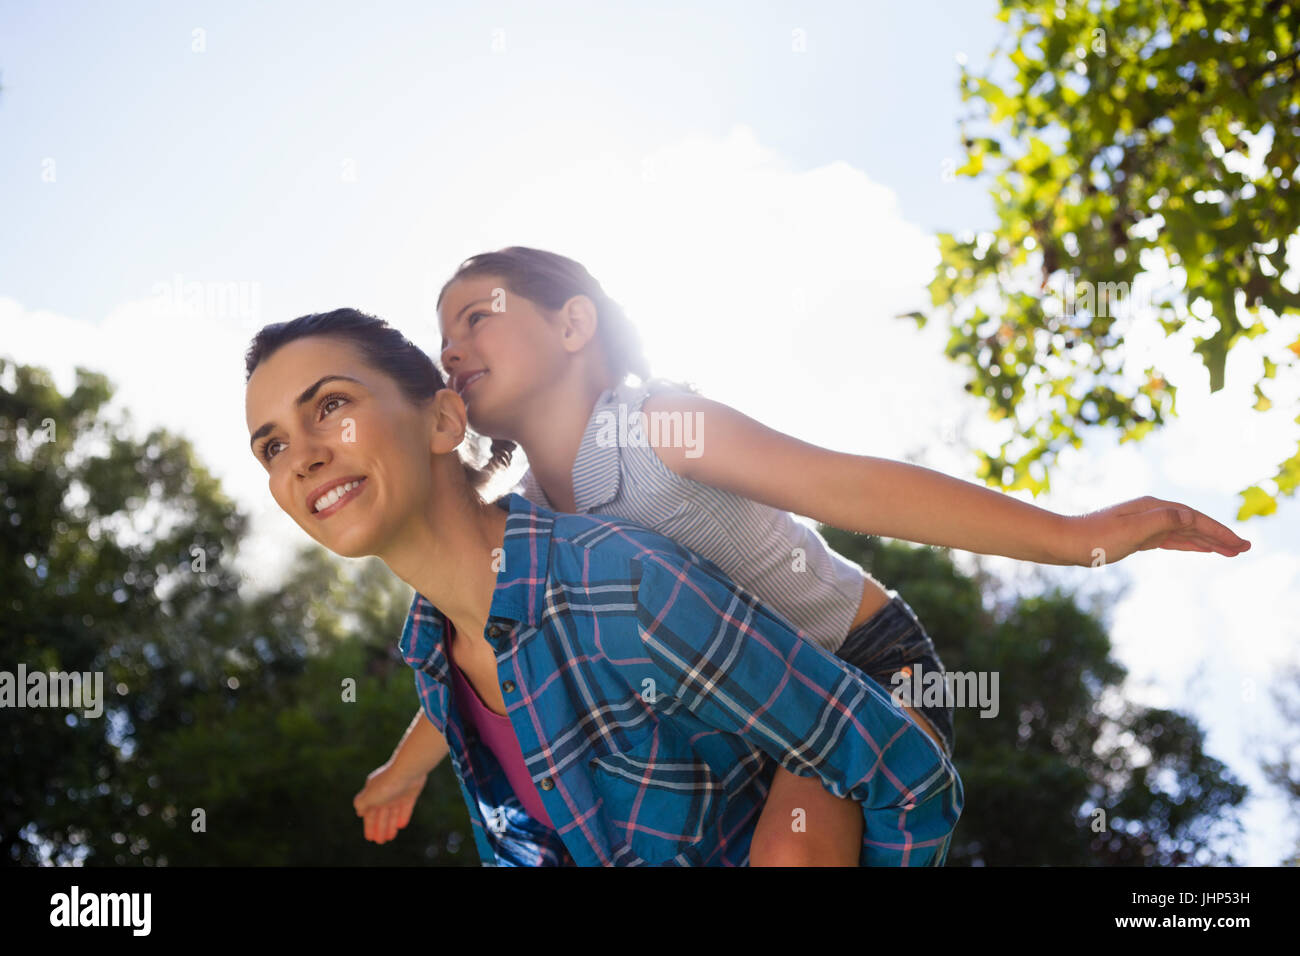 Low angle view of girl with arms outstretched enjoying piggyback ride on mother against sky in backyard Stock Photo